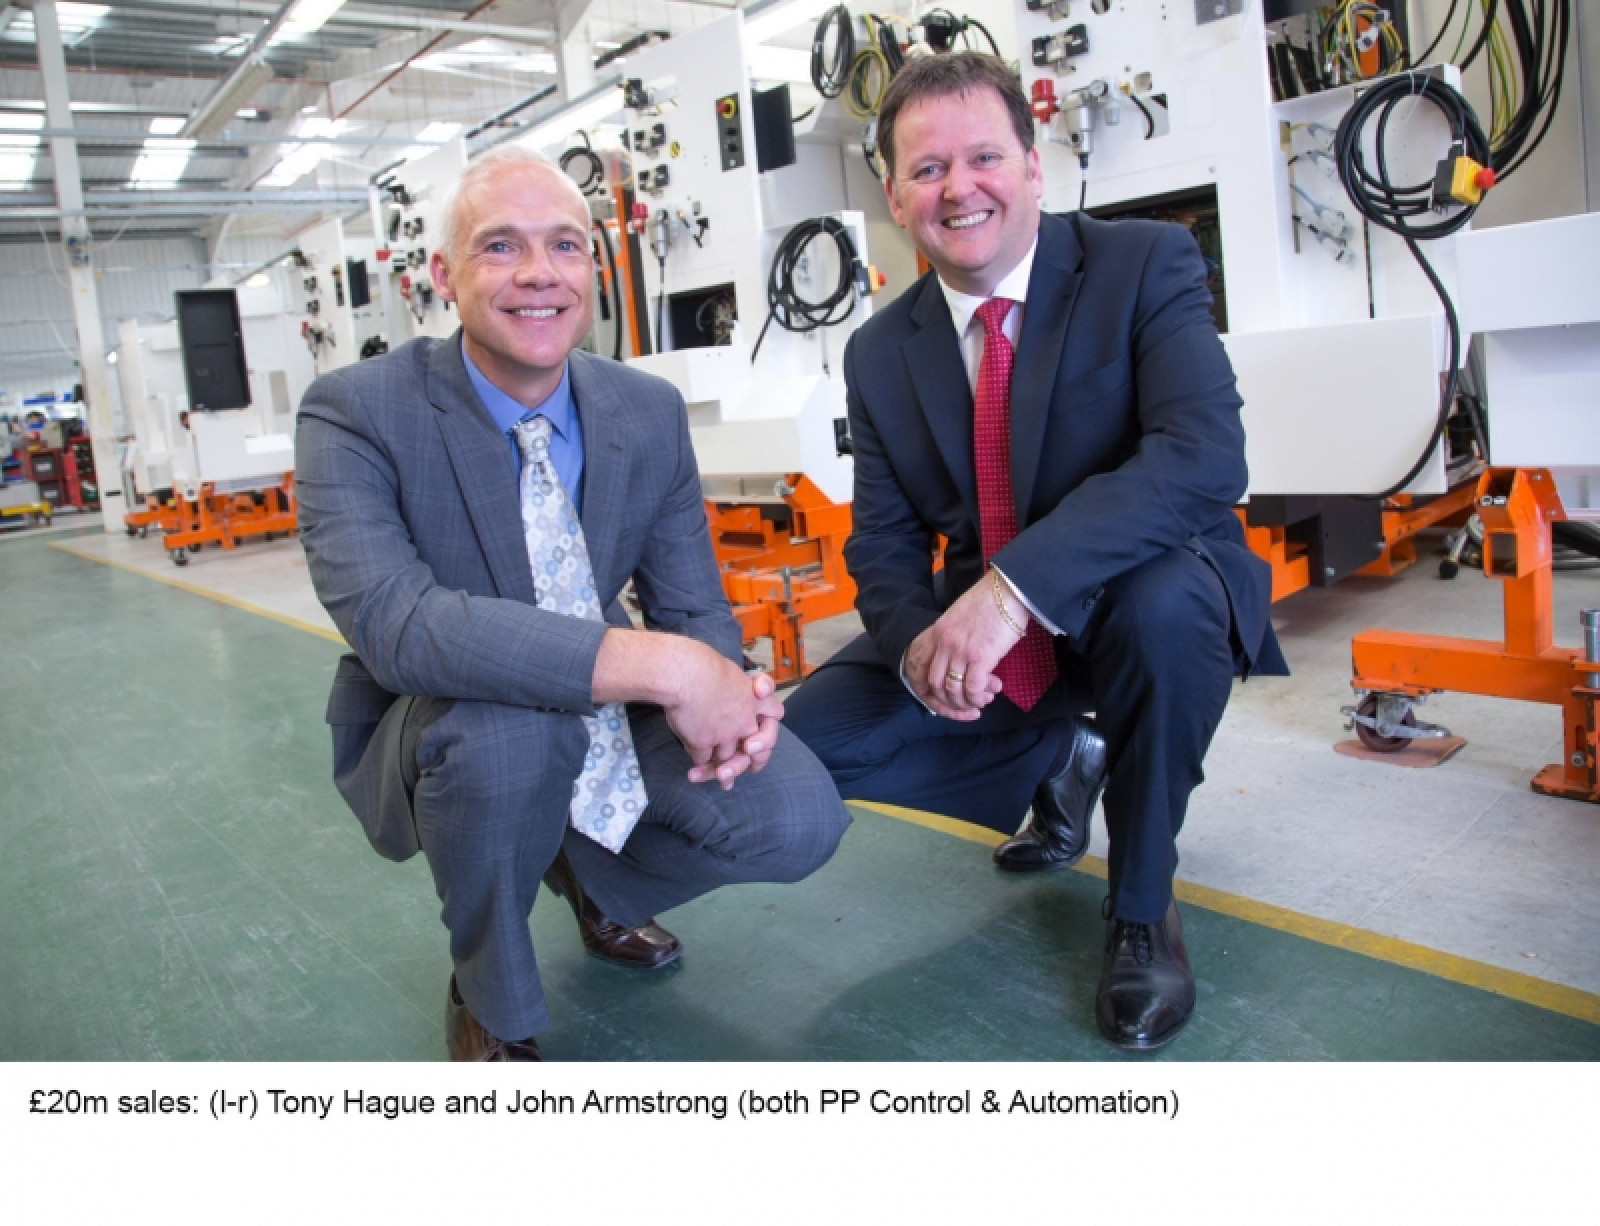 PP on course for £20m sales after machinery builde...